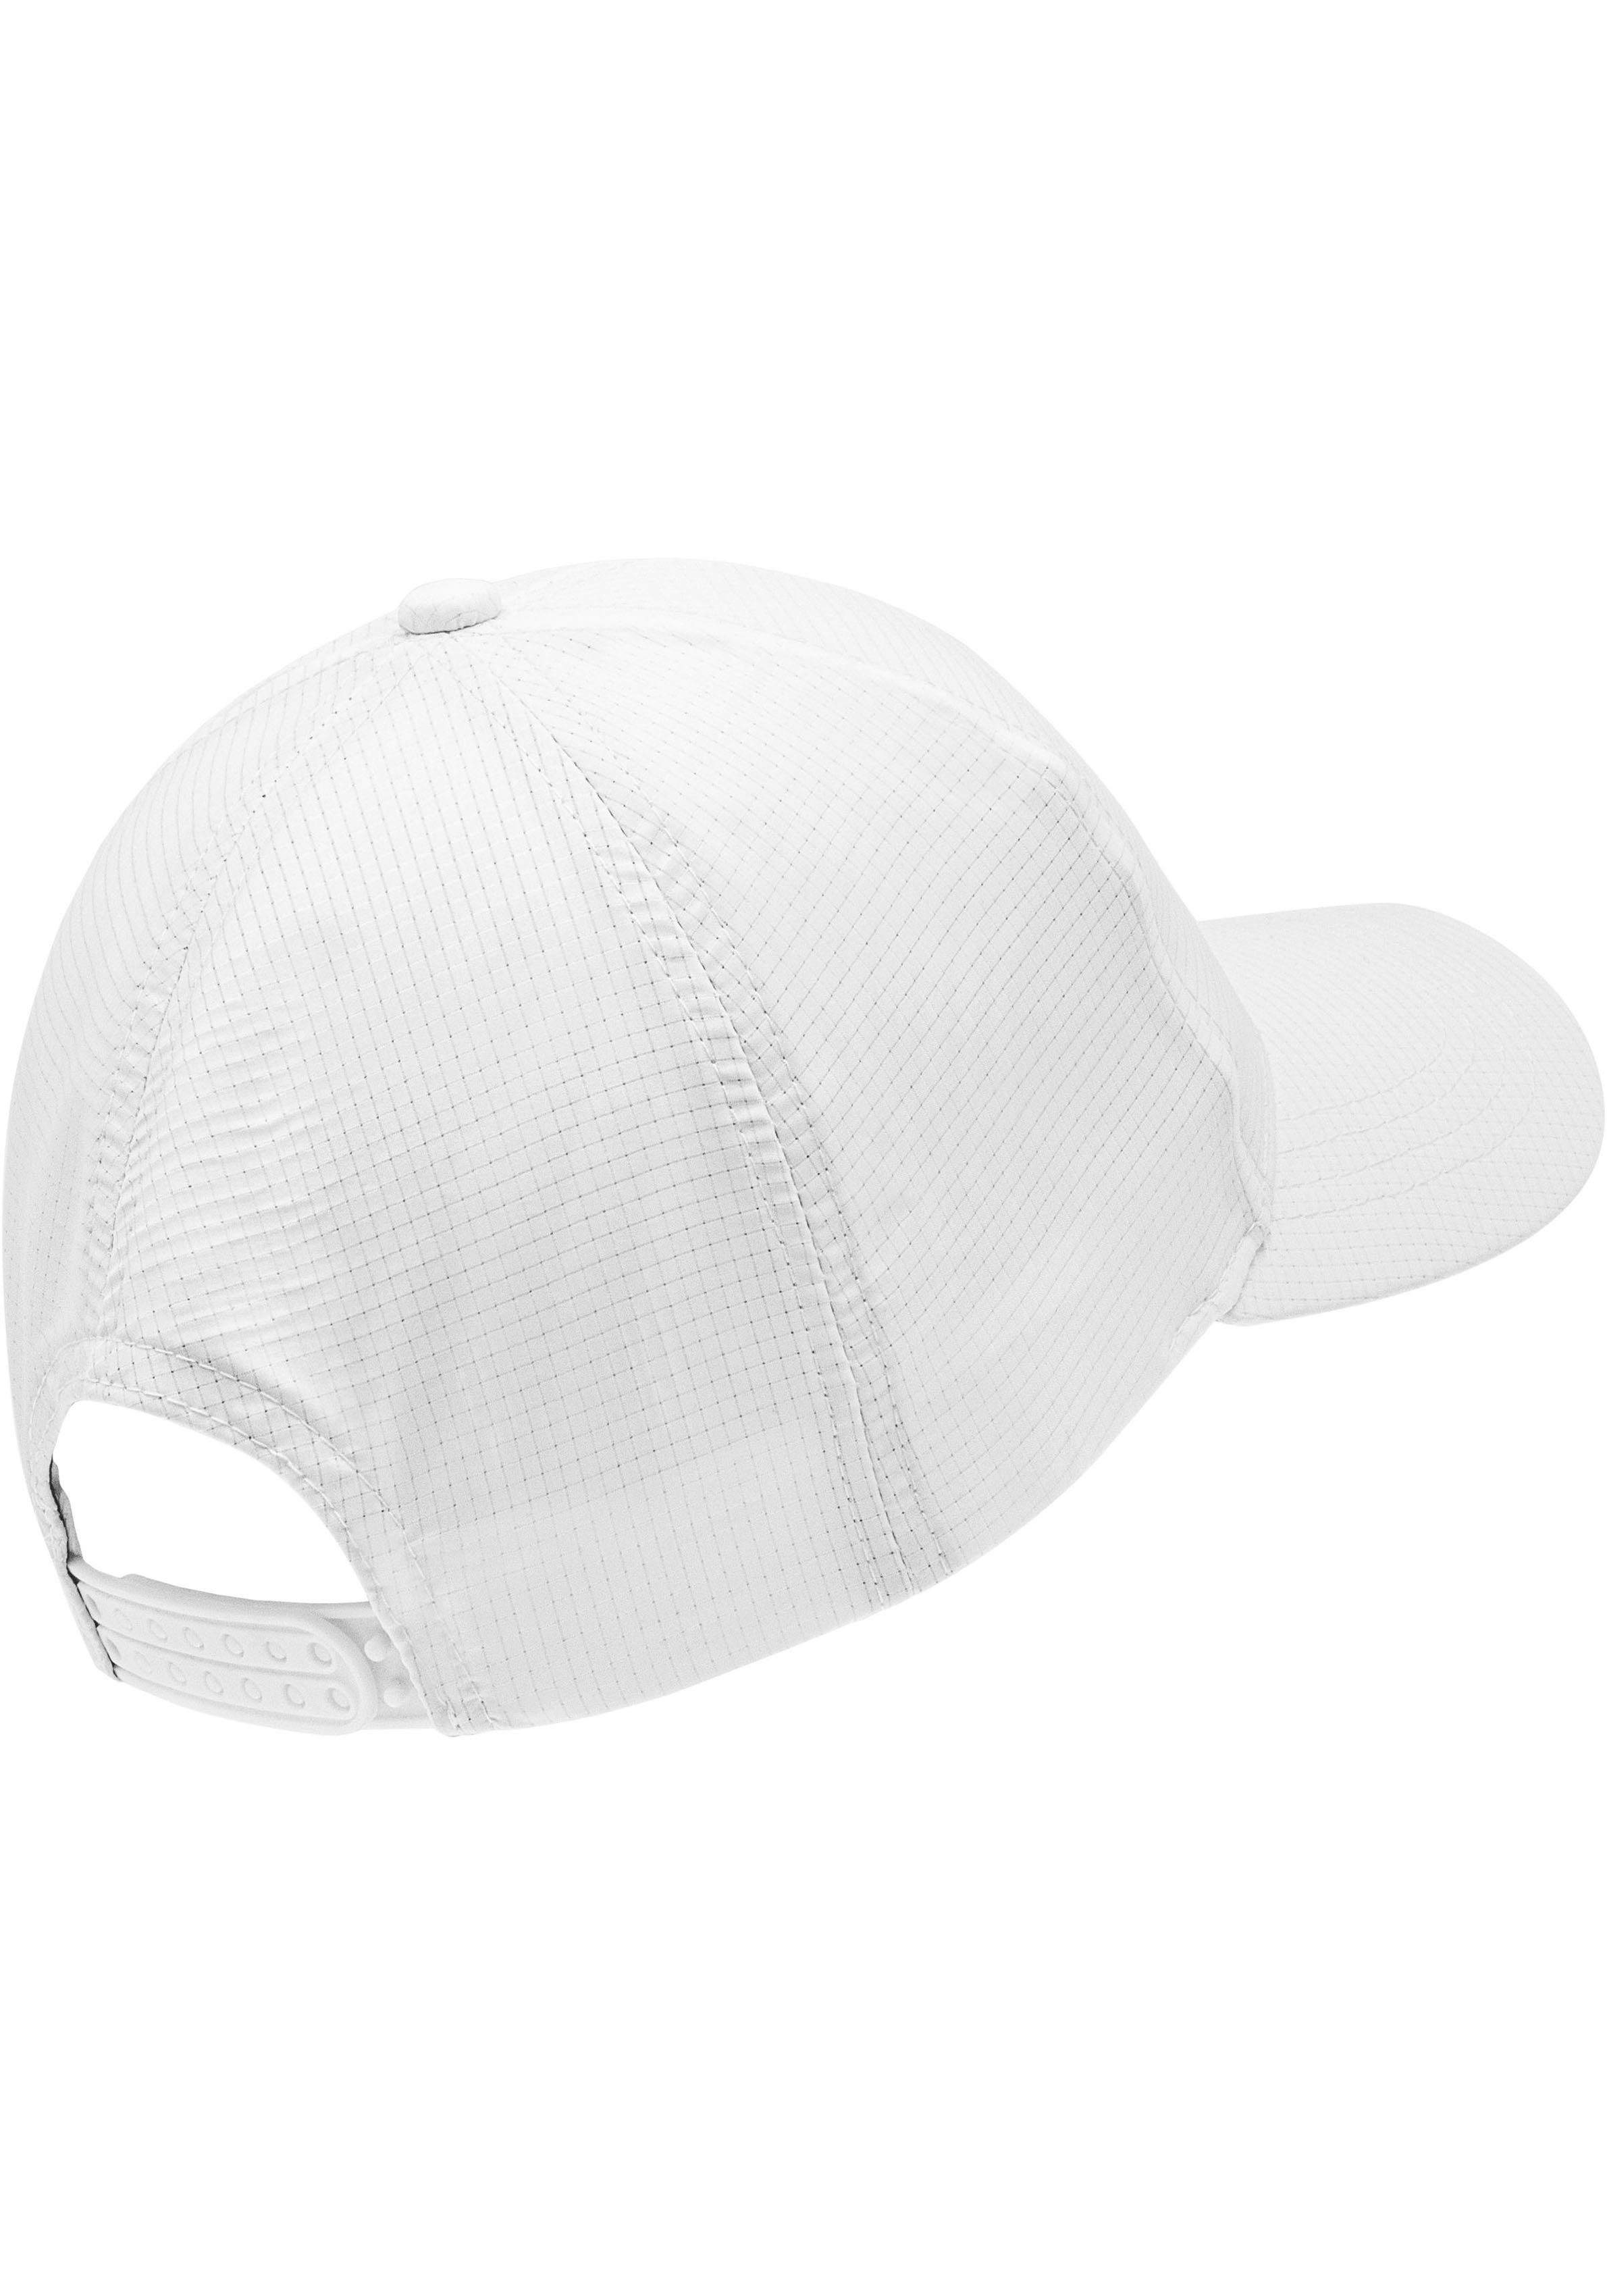 chillouts Baseball Cap Langley Hat weiß